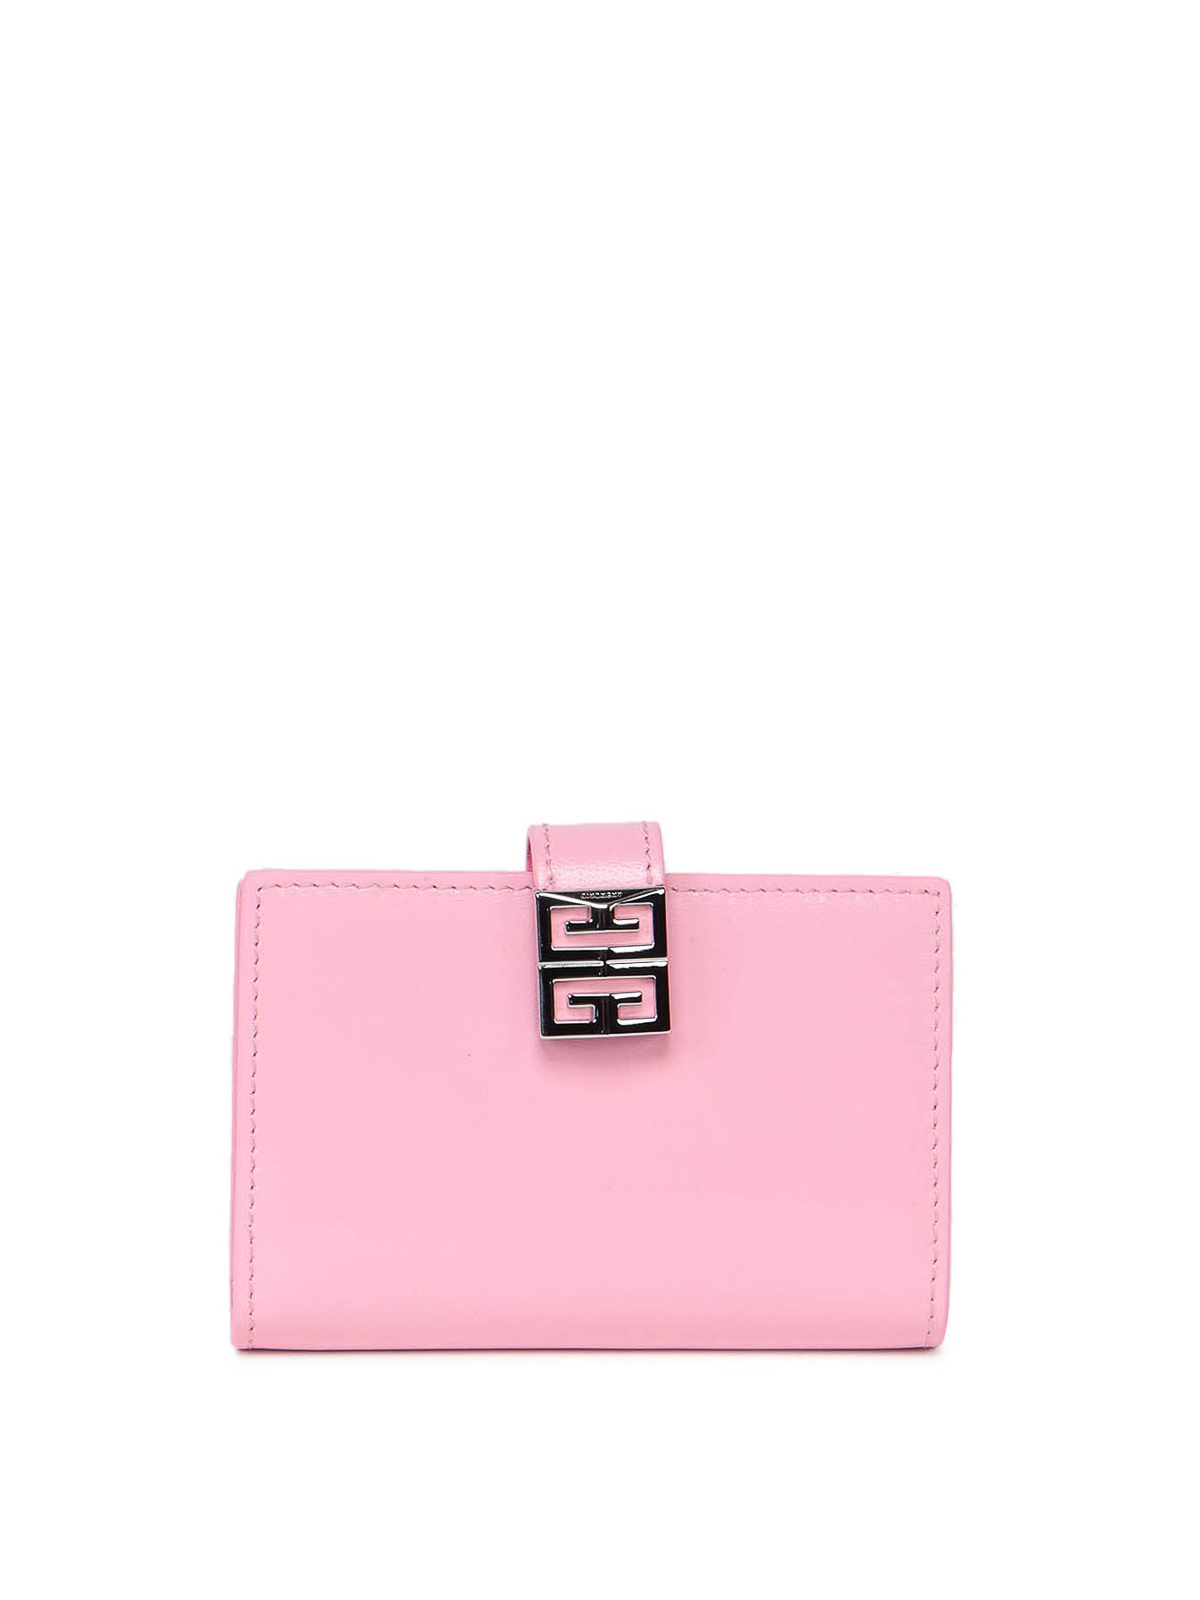 Wallets & purses Givenchy - 4G pink leather card holder